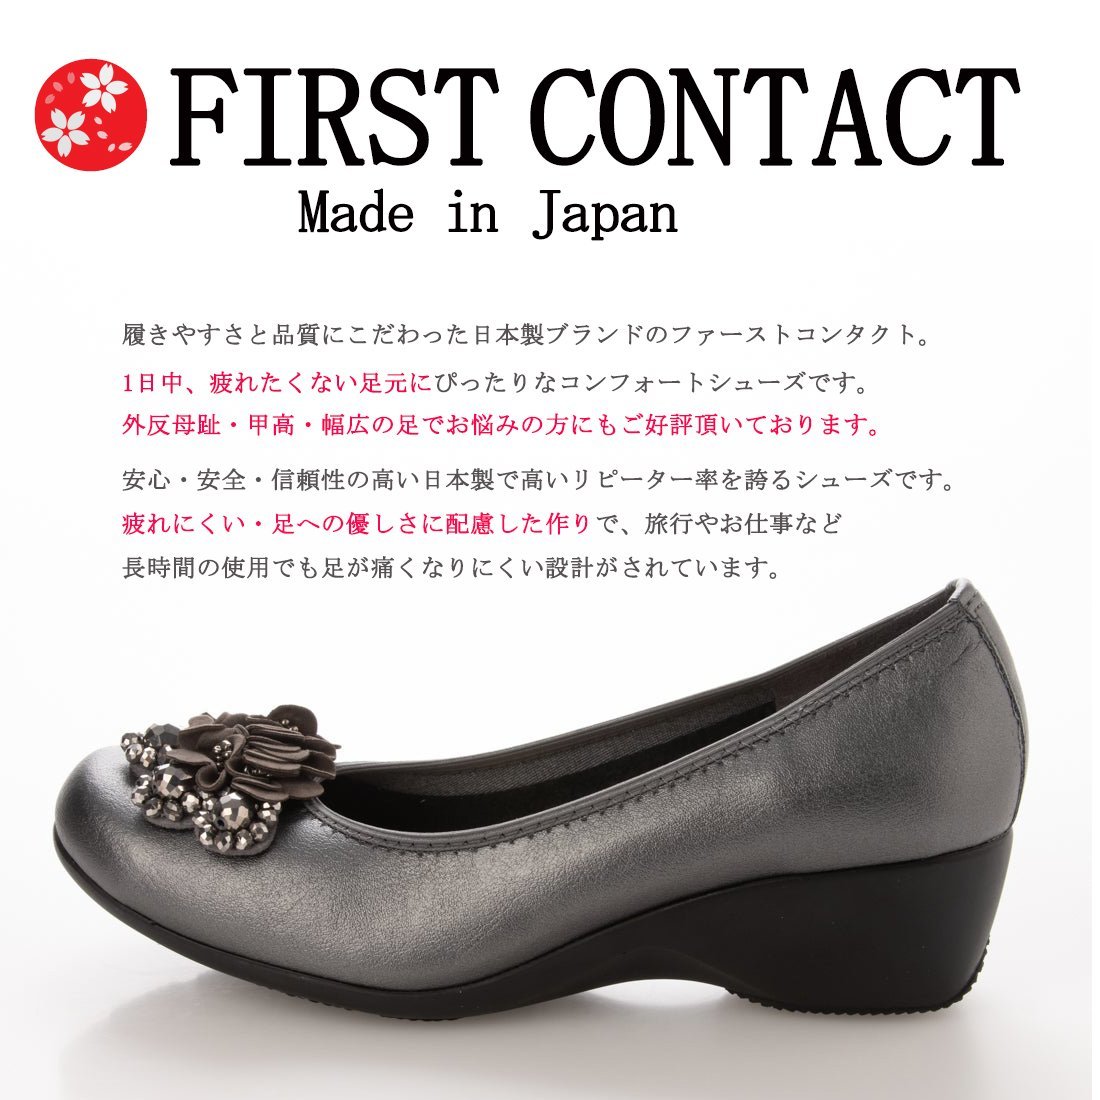 36lk free shipping First Contact pumps made in Japan biju- pain . not Mother's Day Wedge comfort runs casual office through 